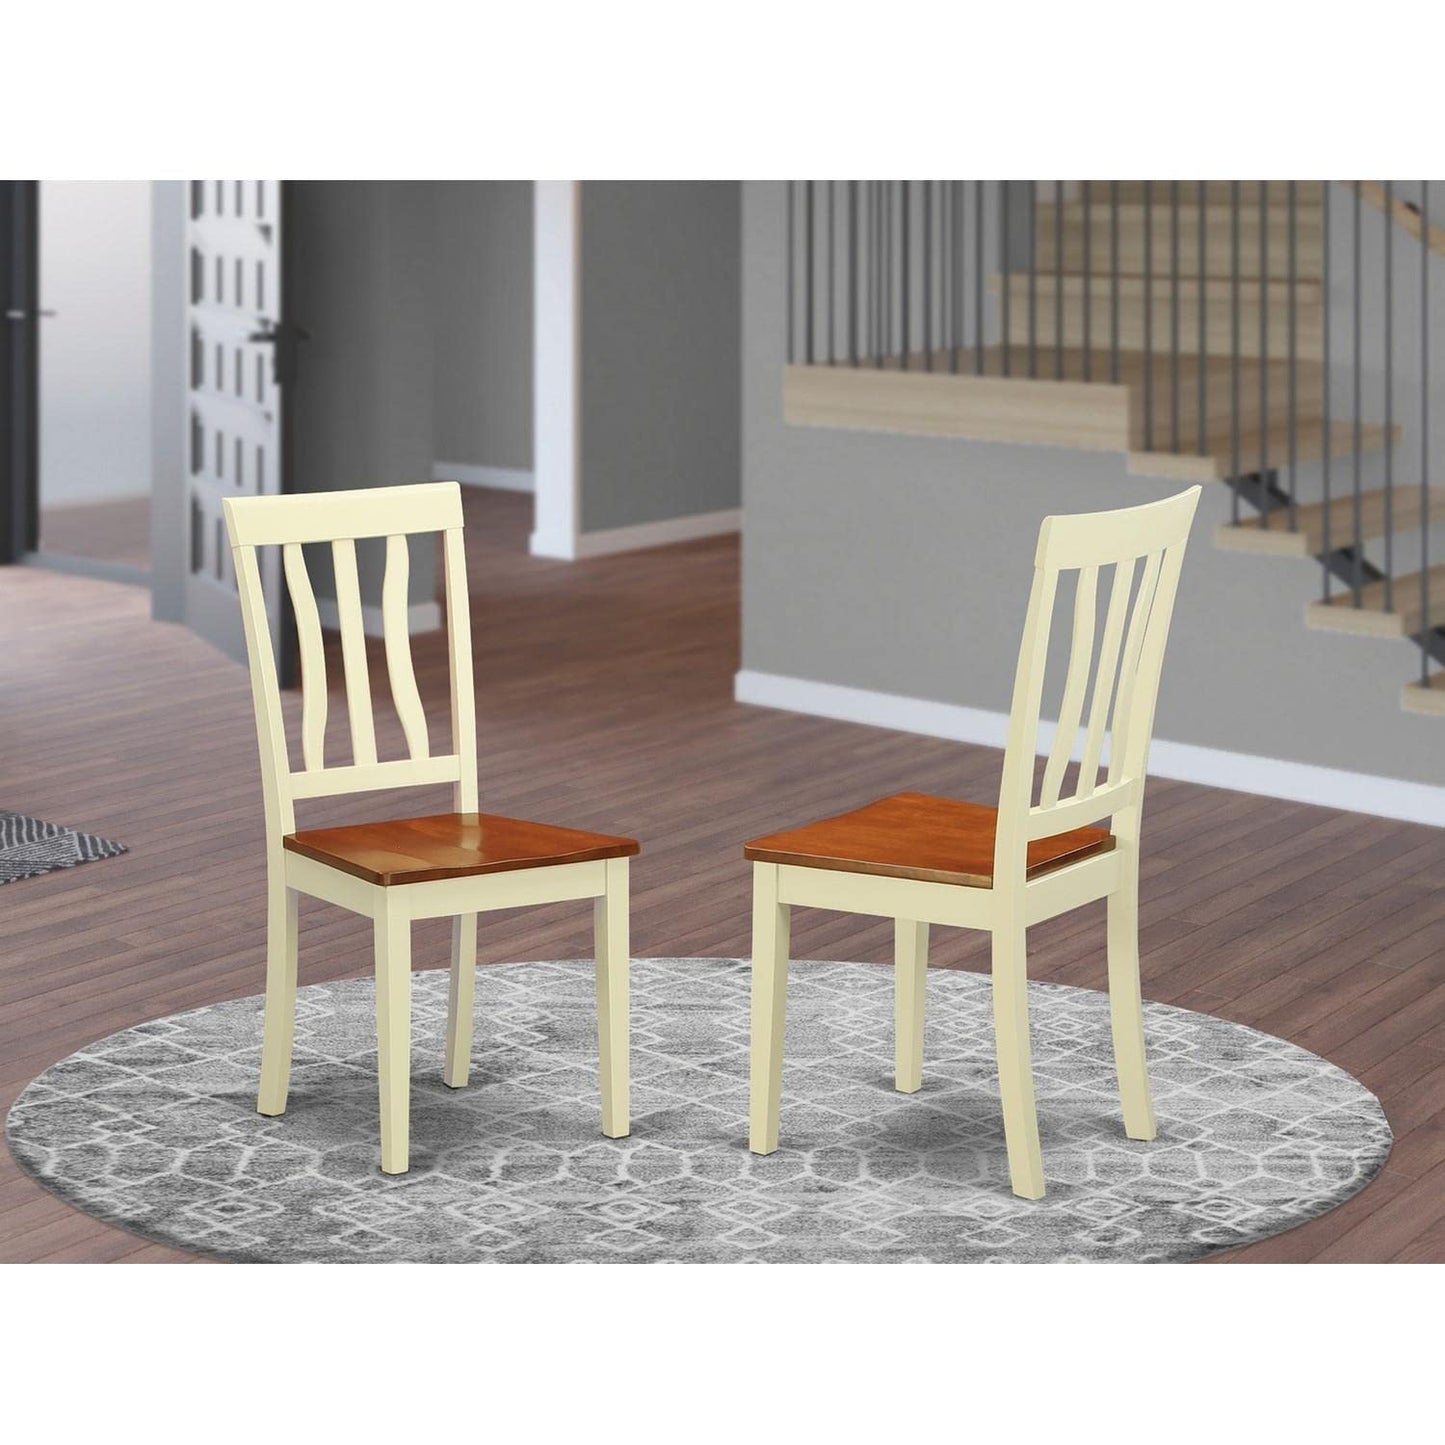 East West Furniture Antique Dining Room Slat Back Solid Wood Seat Chairs, Set of 2, Buttermilk & Cherry